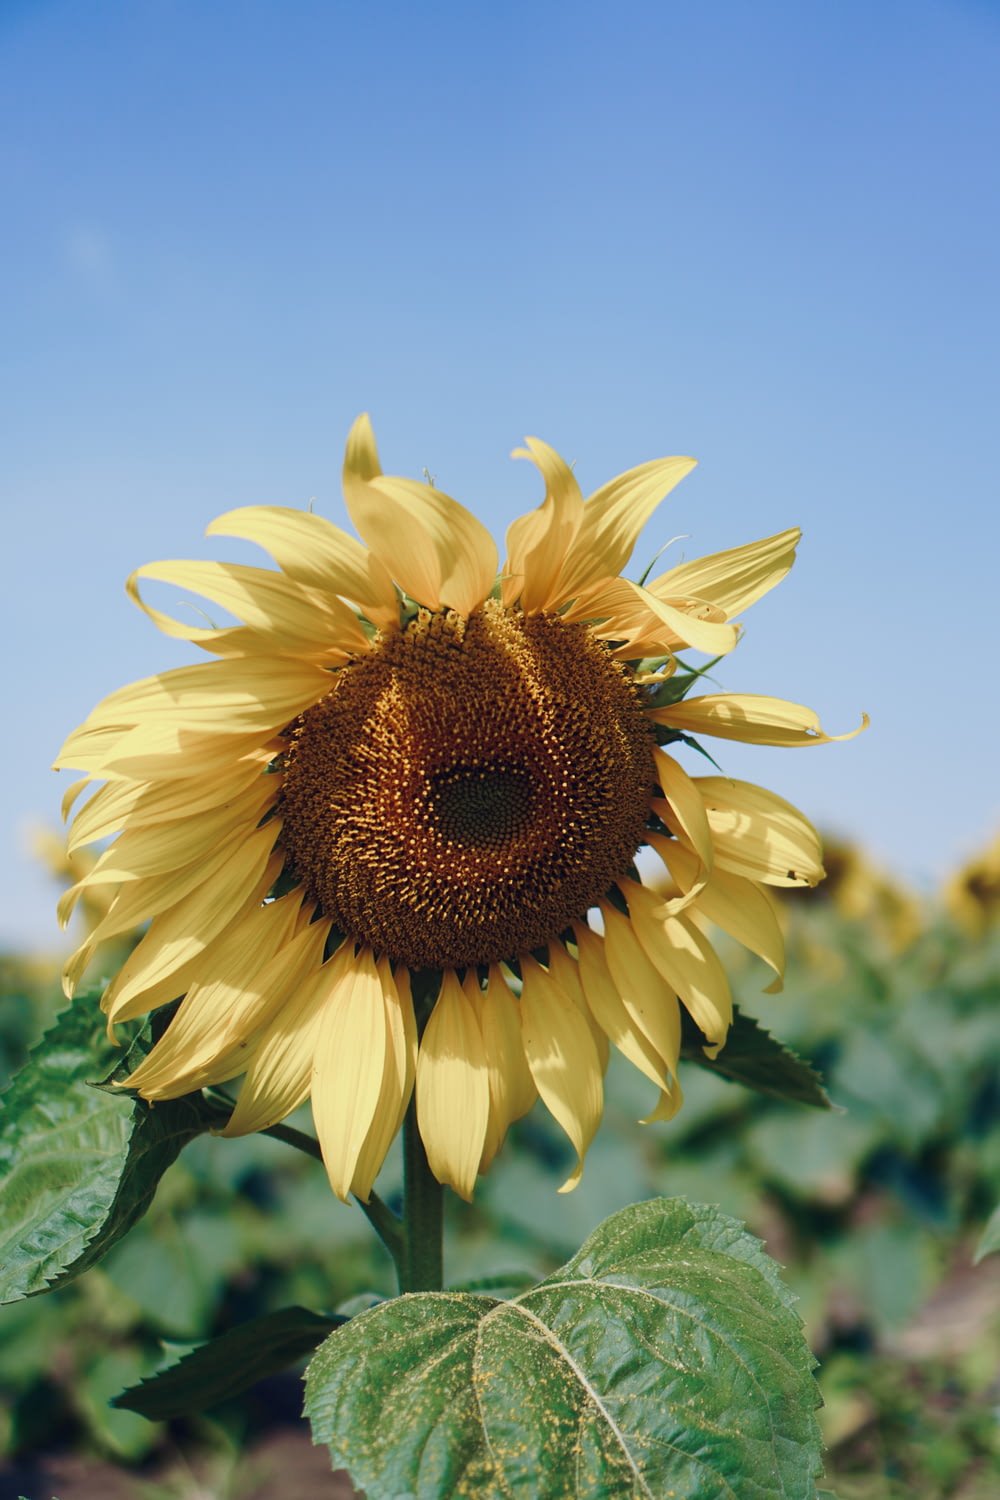 a sunflower with a large center